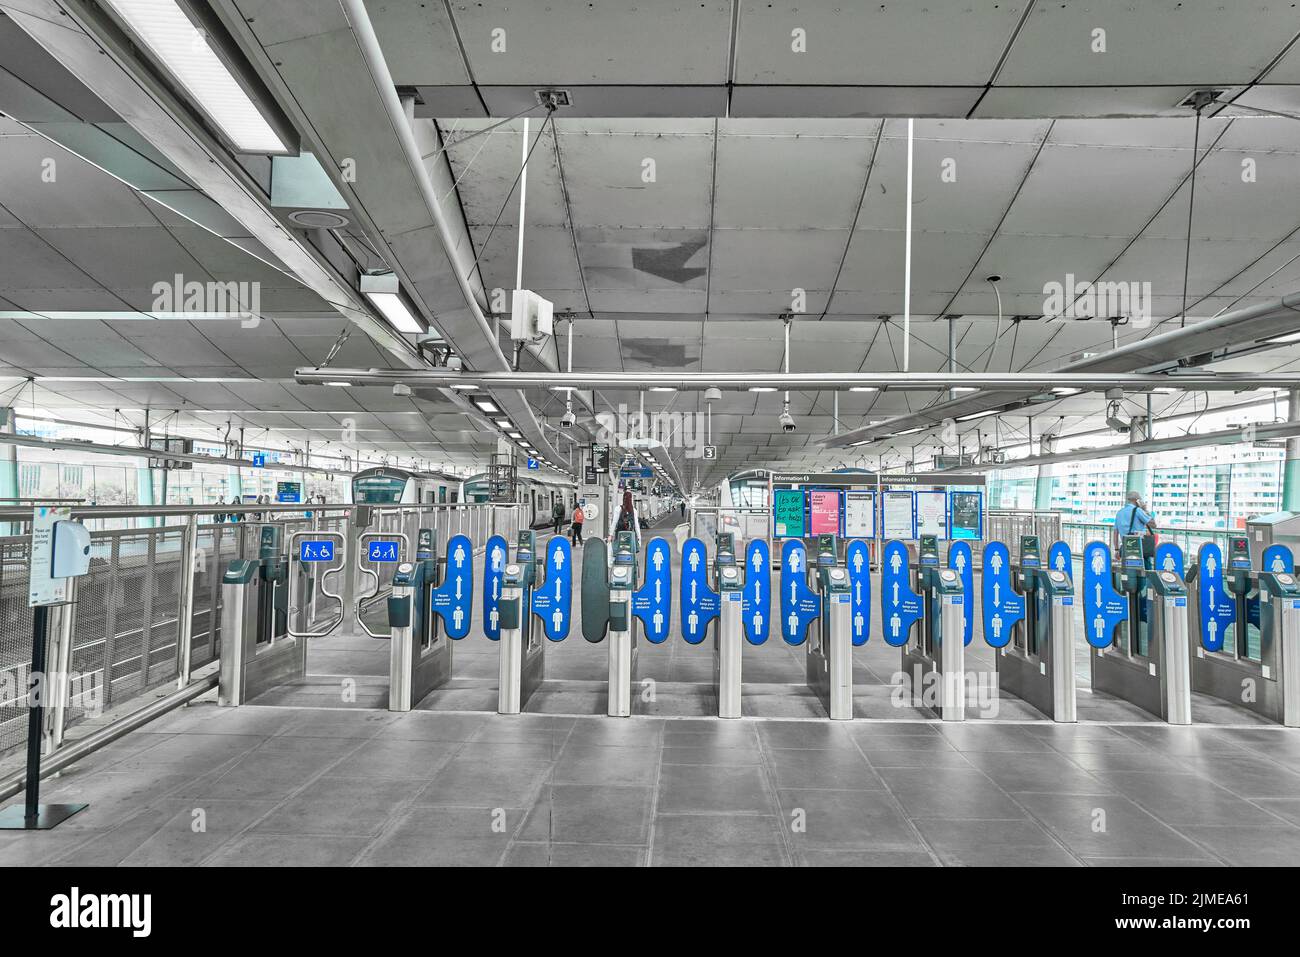 Concourse and ticket barrier at Blackfriars rail station, London, England. Stock Photo